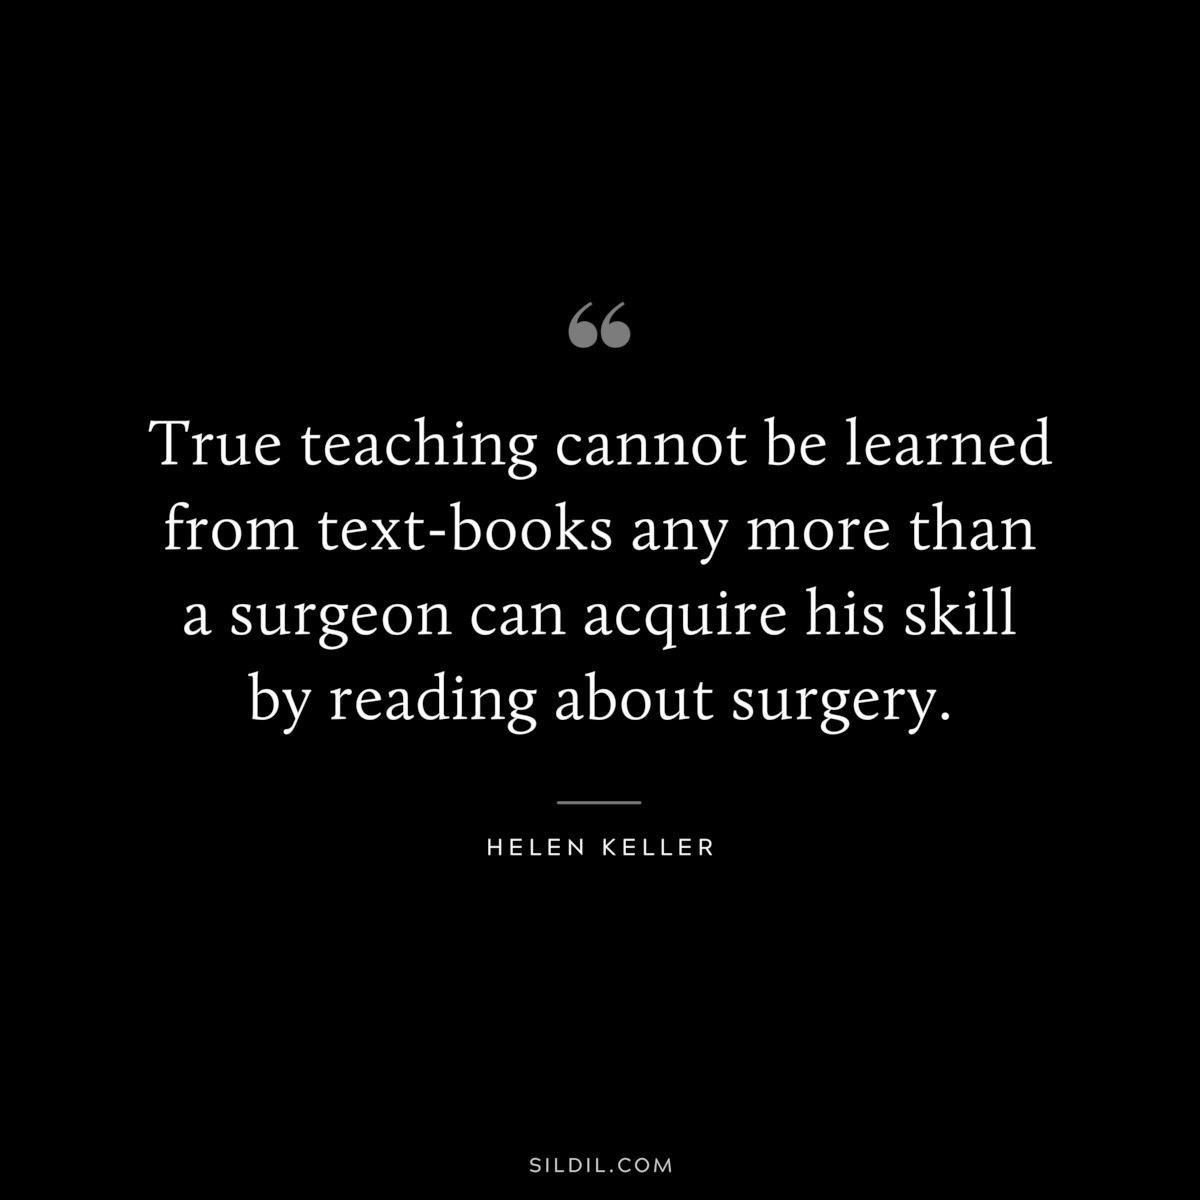 True teaching cannot be learned from text-books any more than a surgeon can acquire his skill by reading about surgery. ― Helen Keller